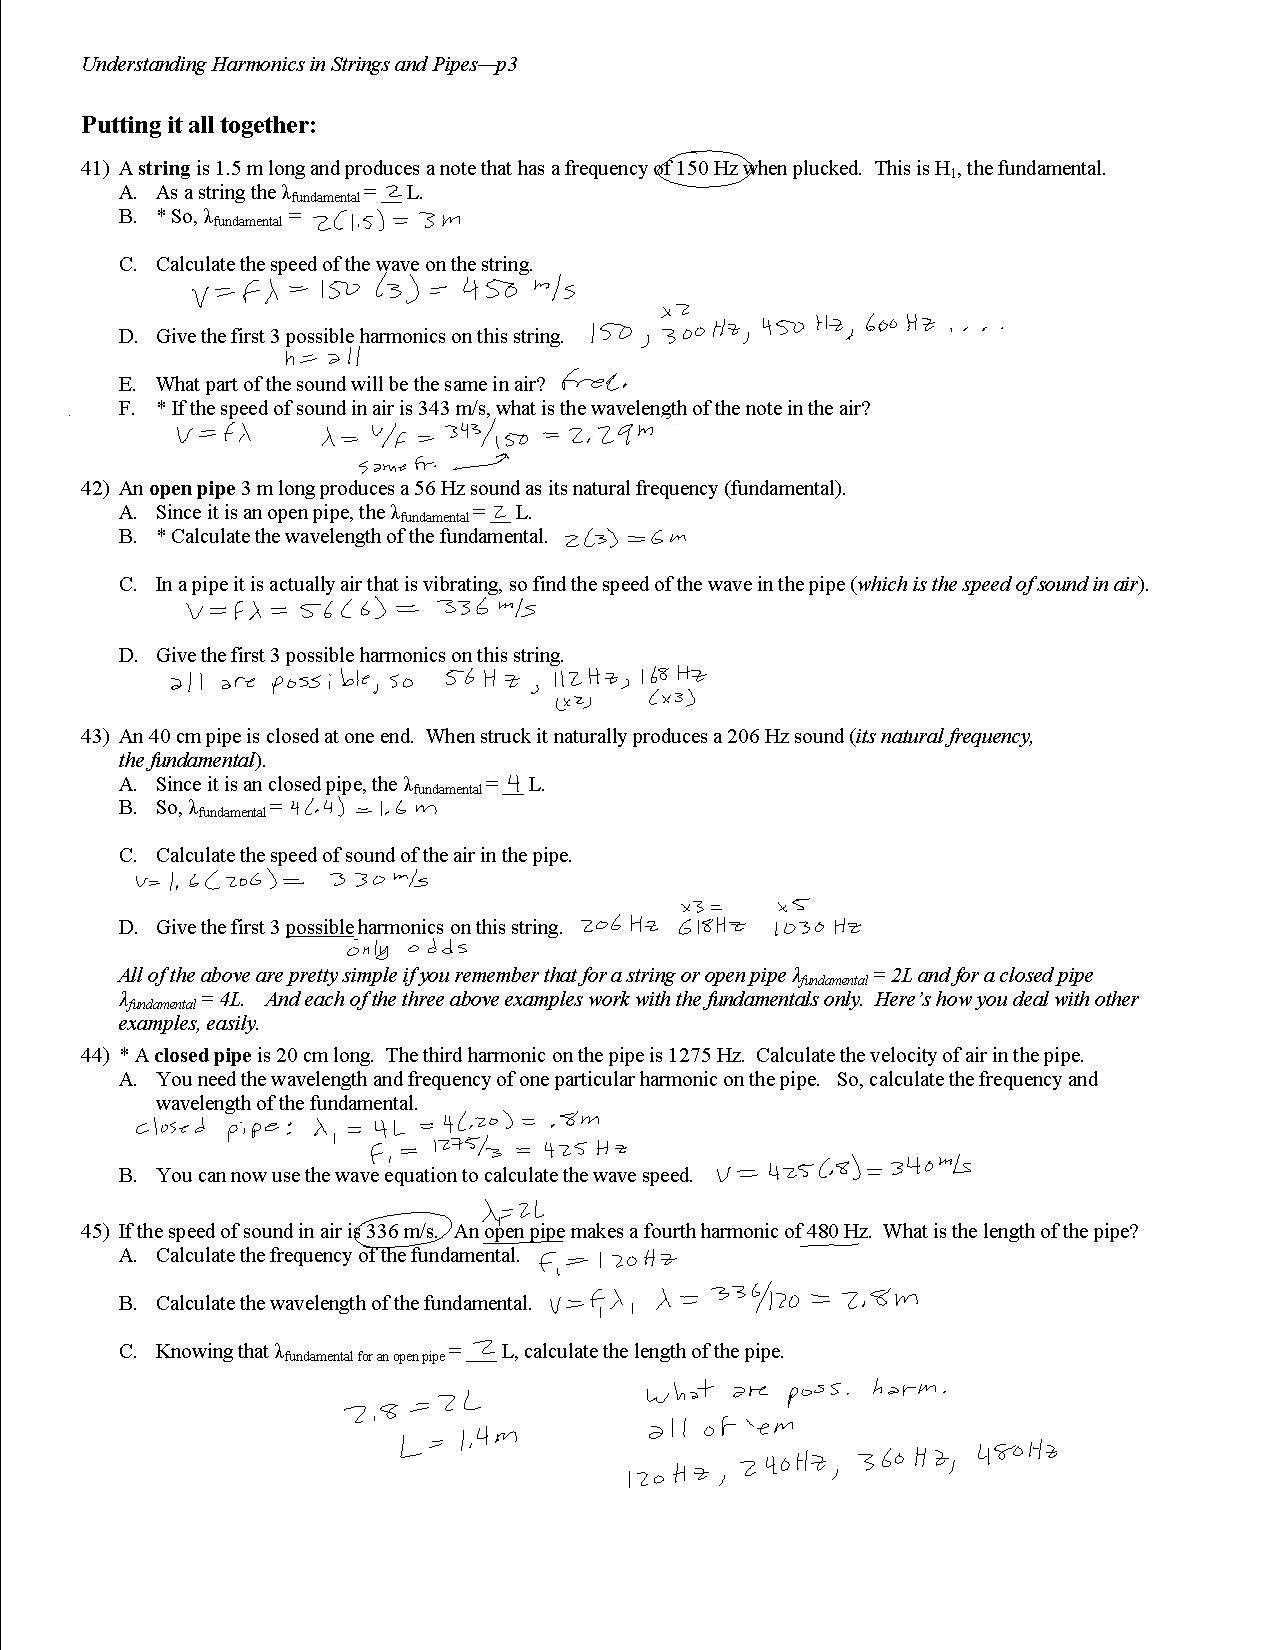 Linear Motion Problems Worksheet together with Kinematics Practice Problems Worksheet Answers